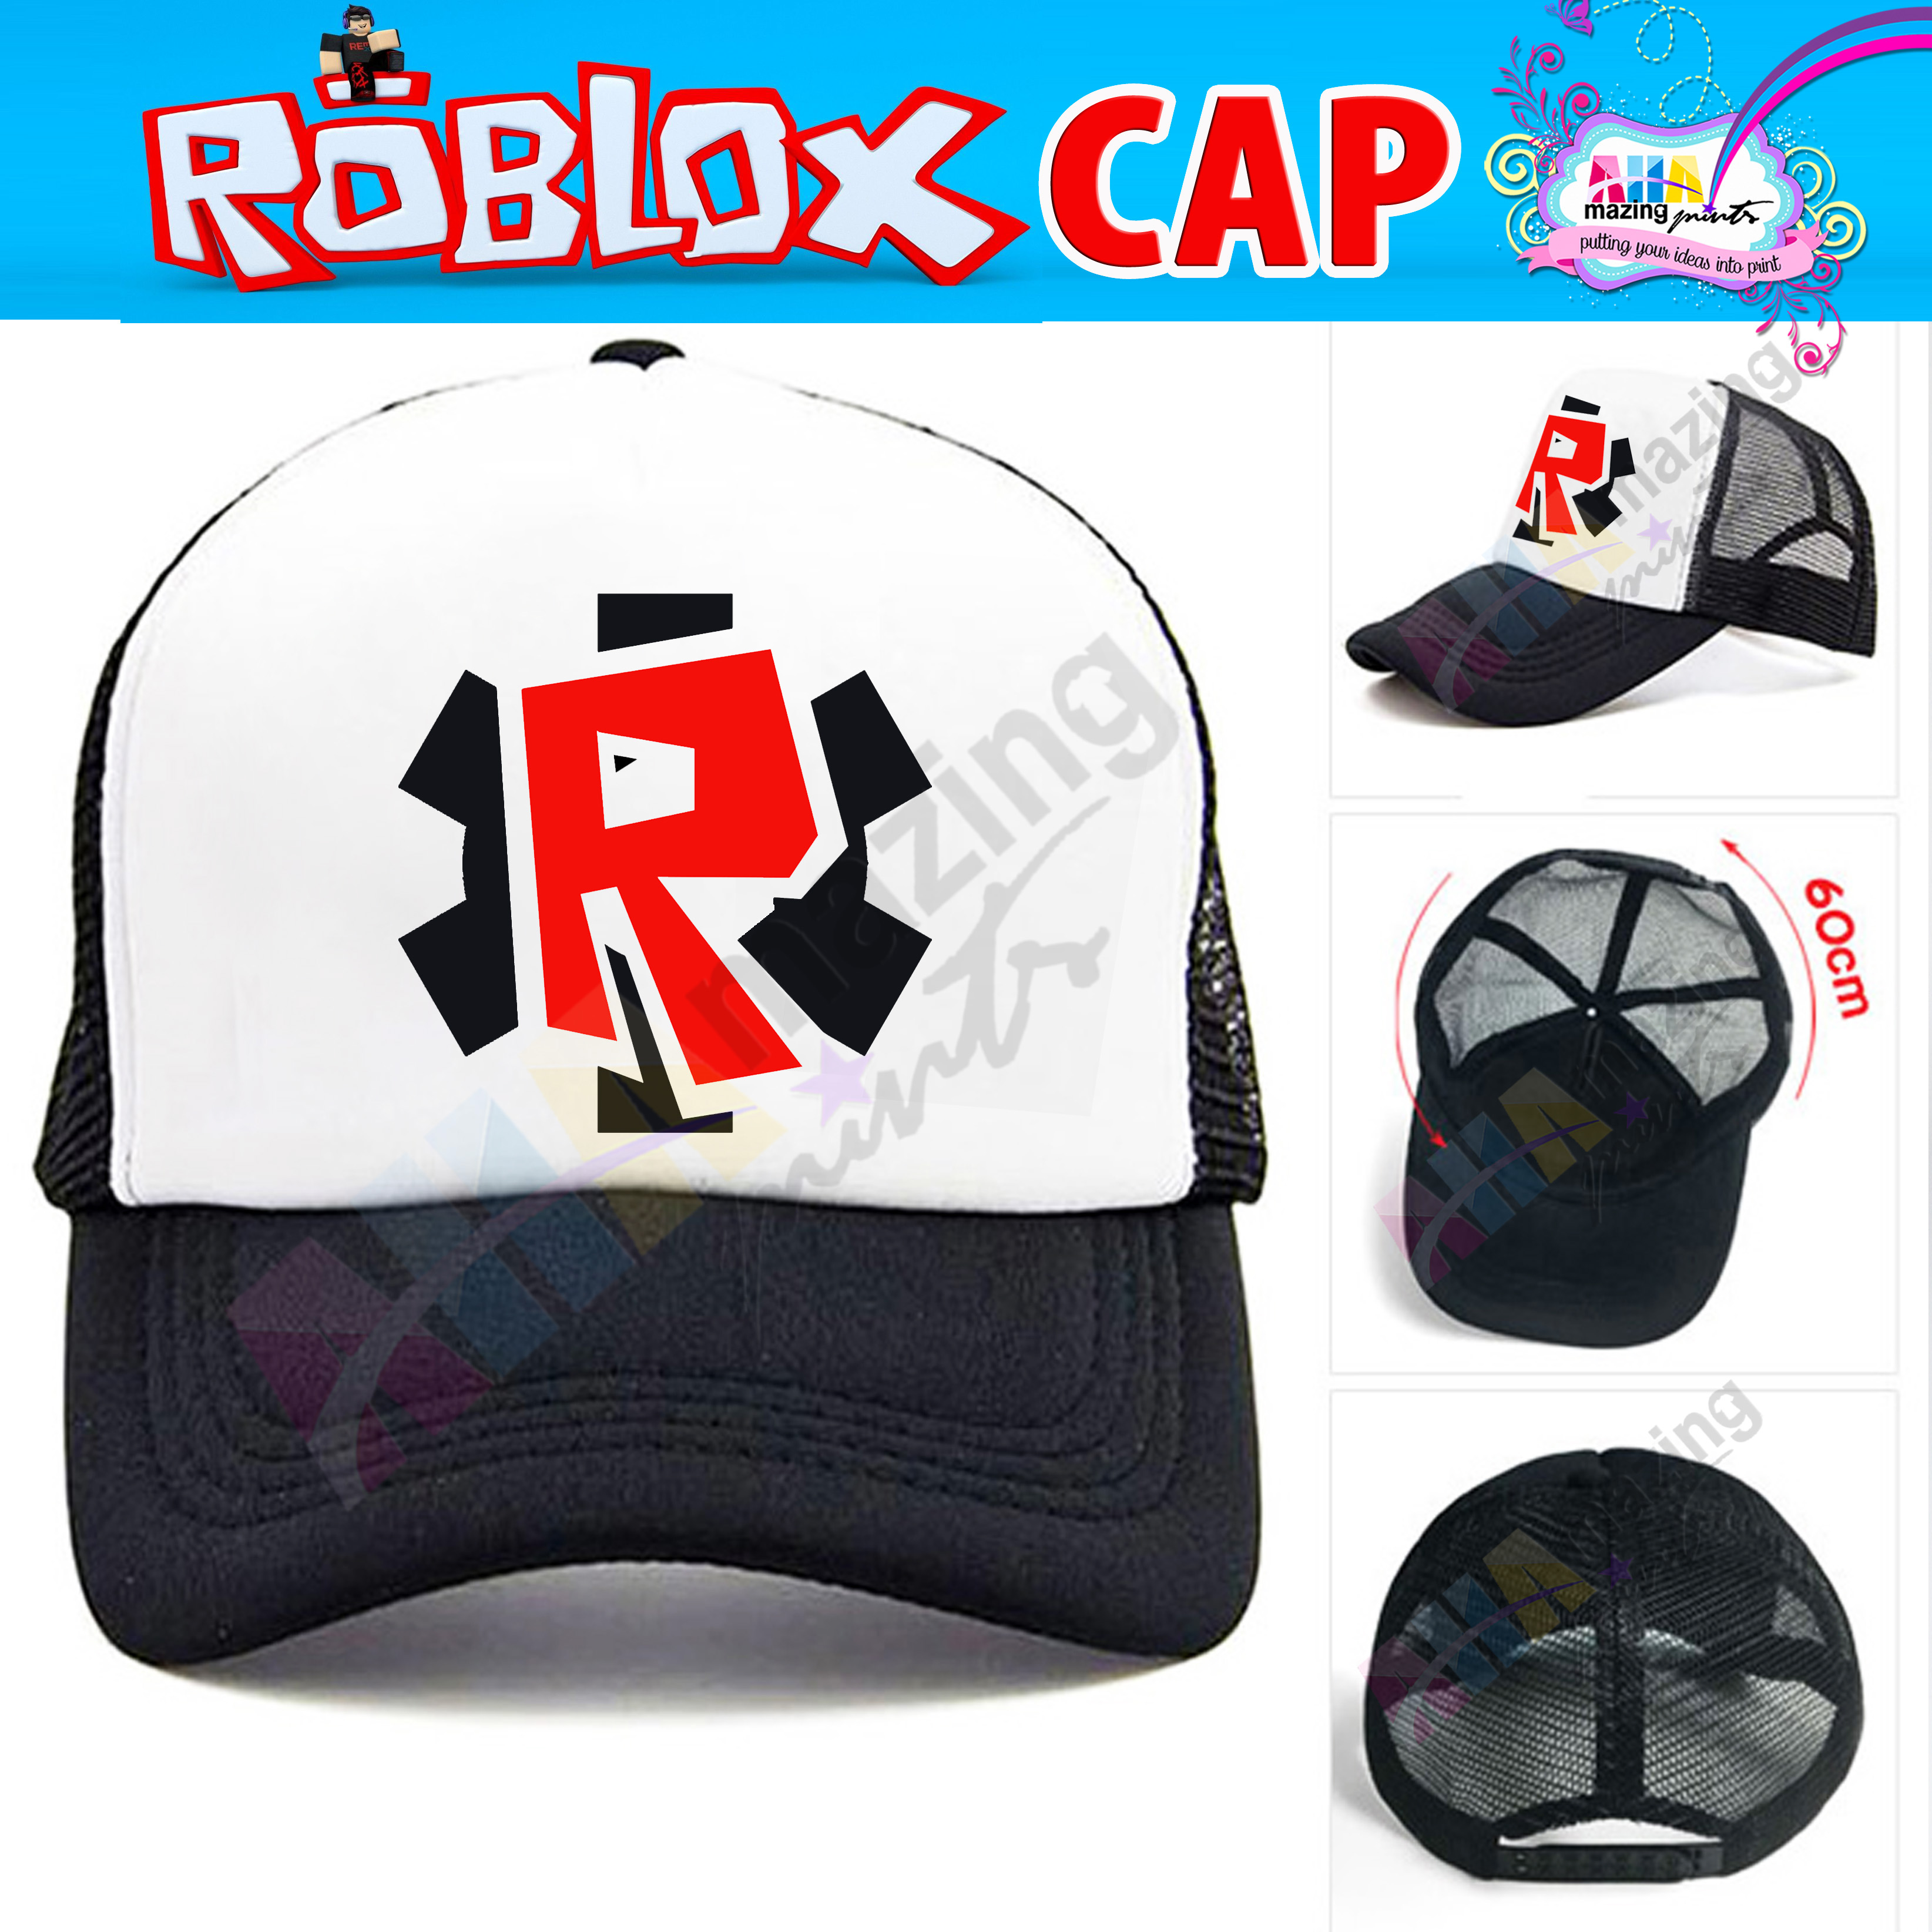 Roblox Gear Adjustable White Black Hat Cap Kids Fashion Top Boys Little Boys And Girls Unisex Statement Casual Custom Children Wear Baby Cute Trending Viral Ootd High Quality Birthday Christmas - black hat top roblox